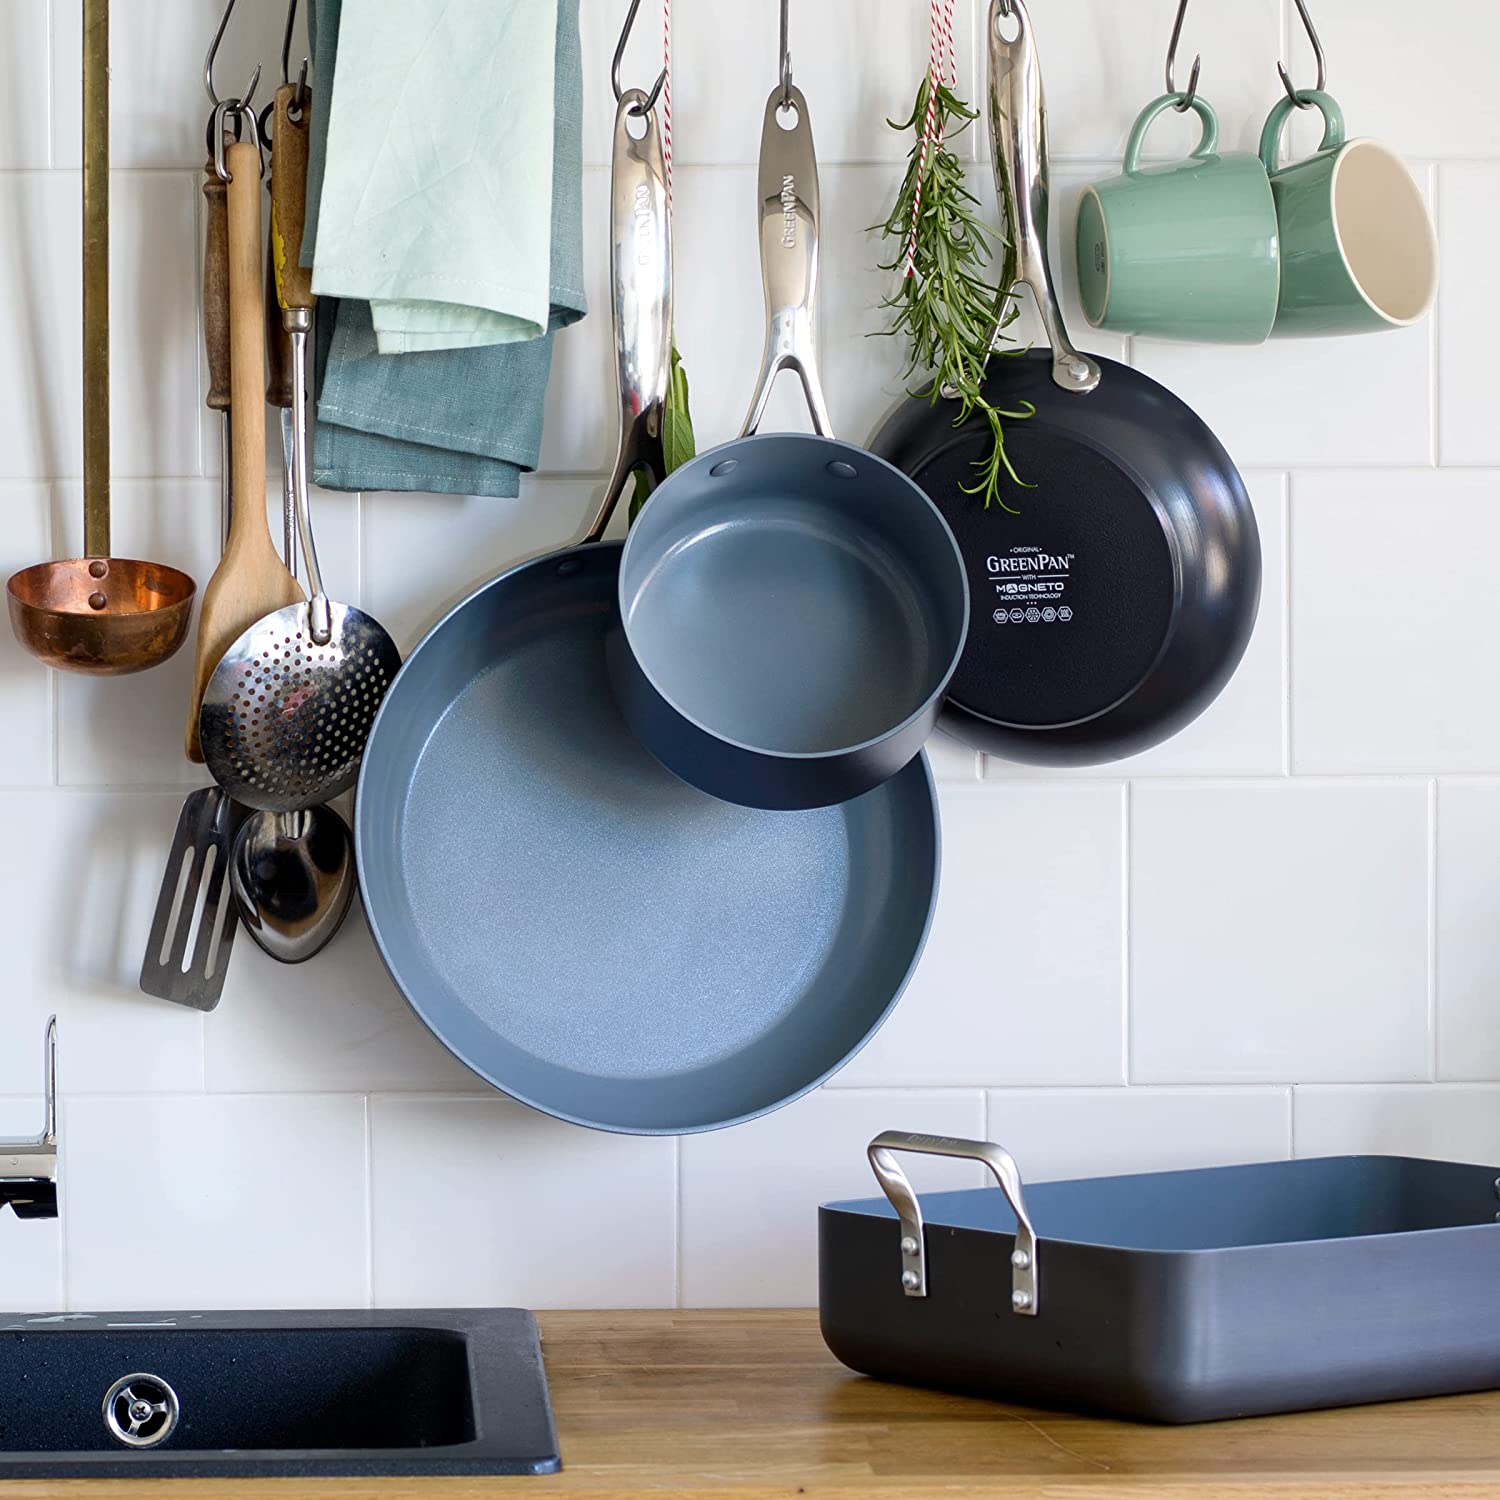 The Best Ceramic Cookware Sets in 2022